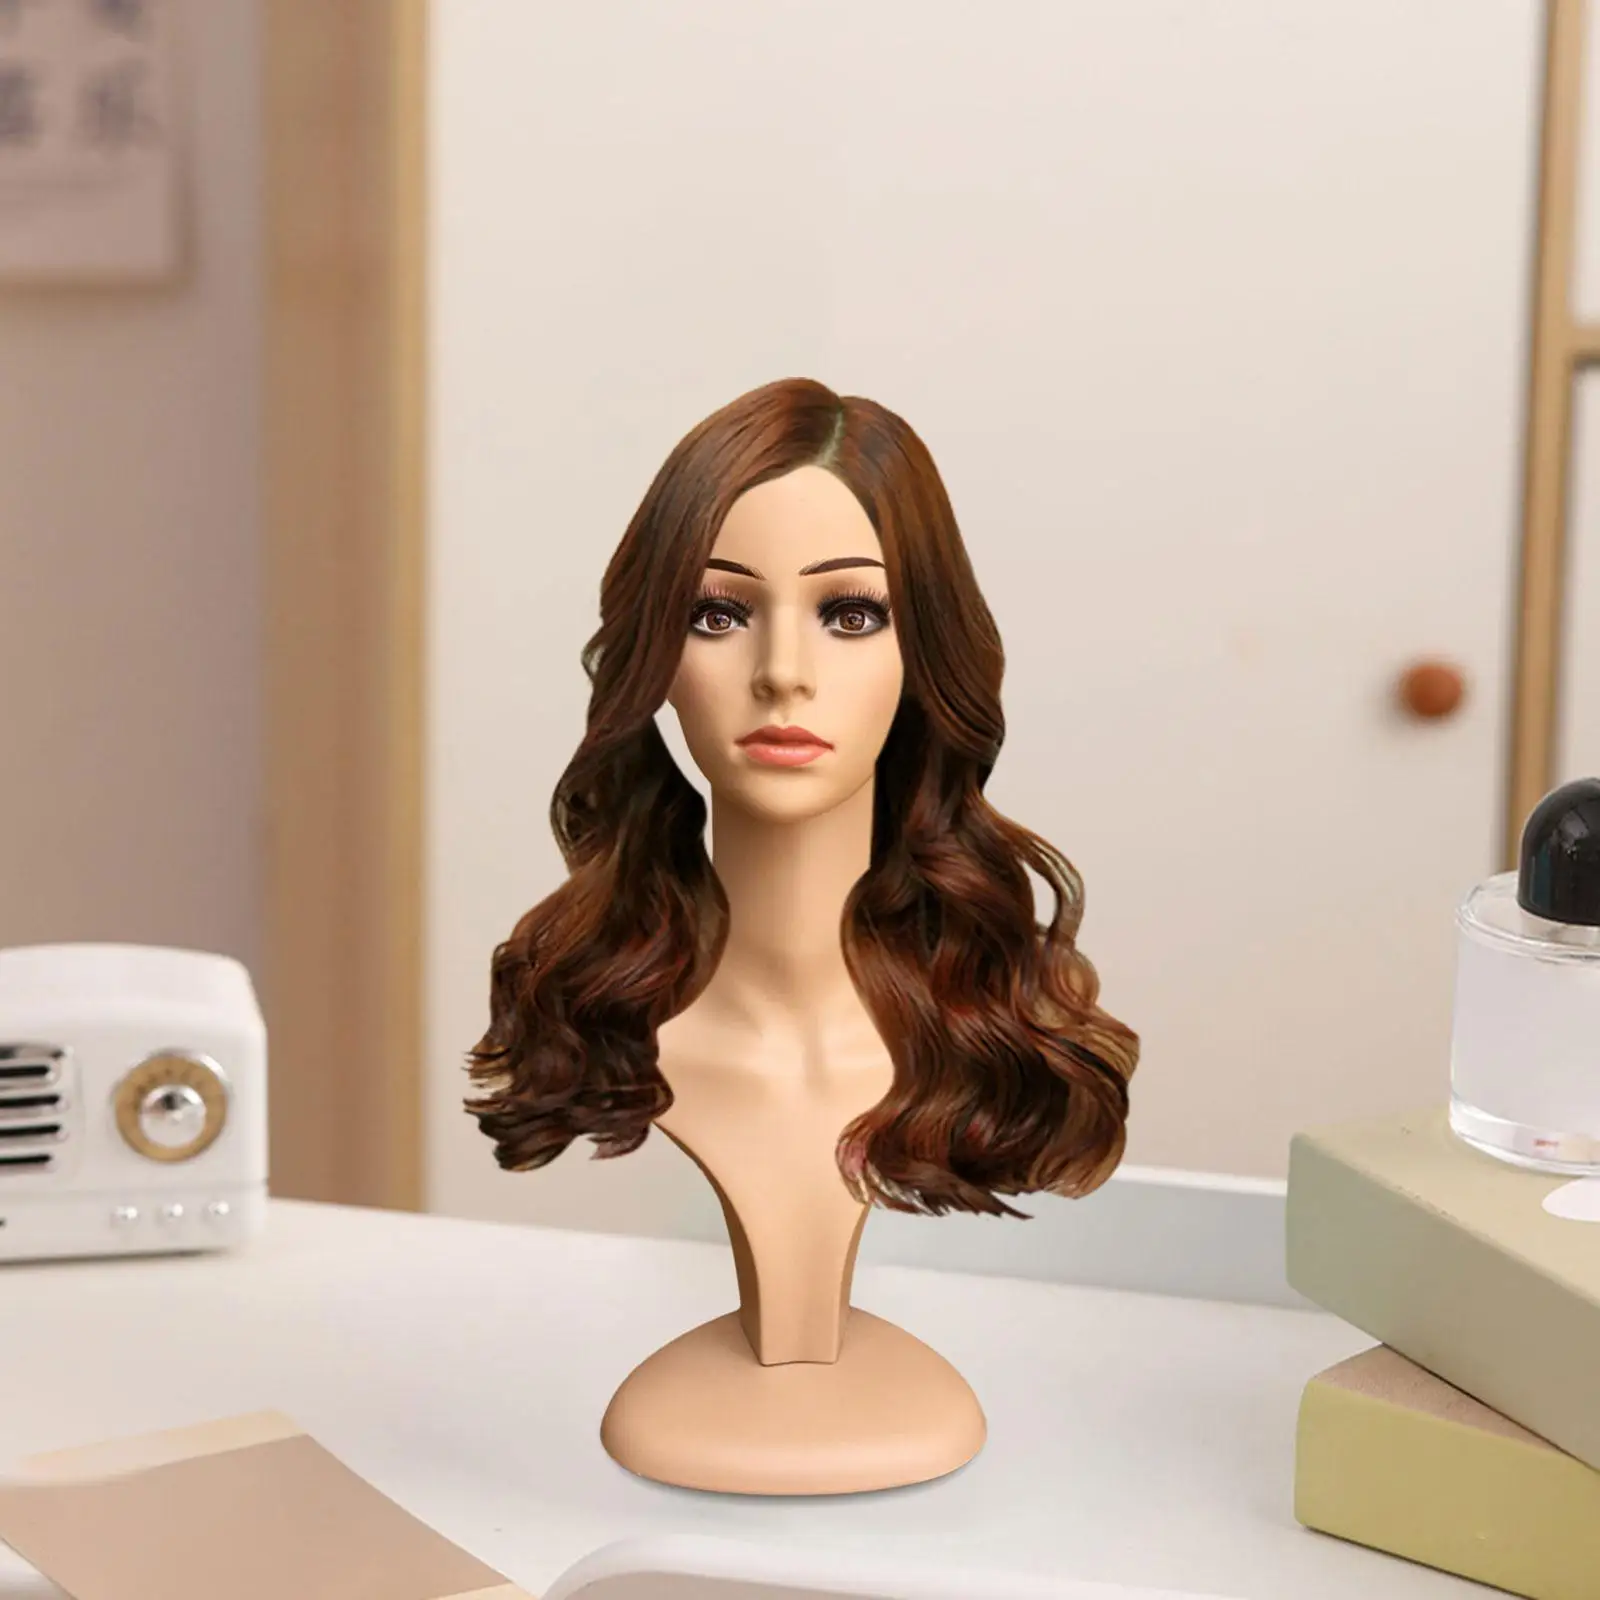 Female Mannequin Head with Shoulder Women Manikin Wig Head Stand for Hats Wigs Displaying Necklaces Jewelry Hairpieces Headwear